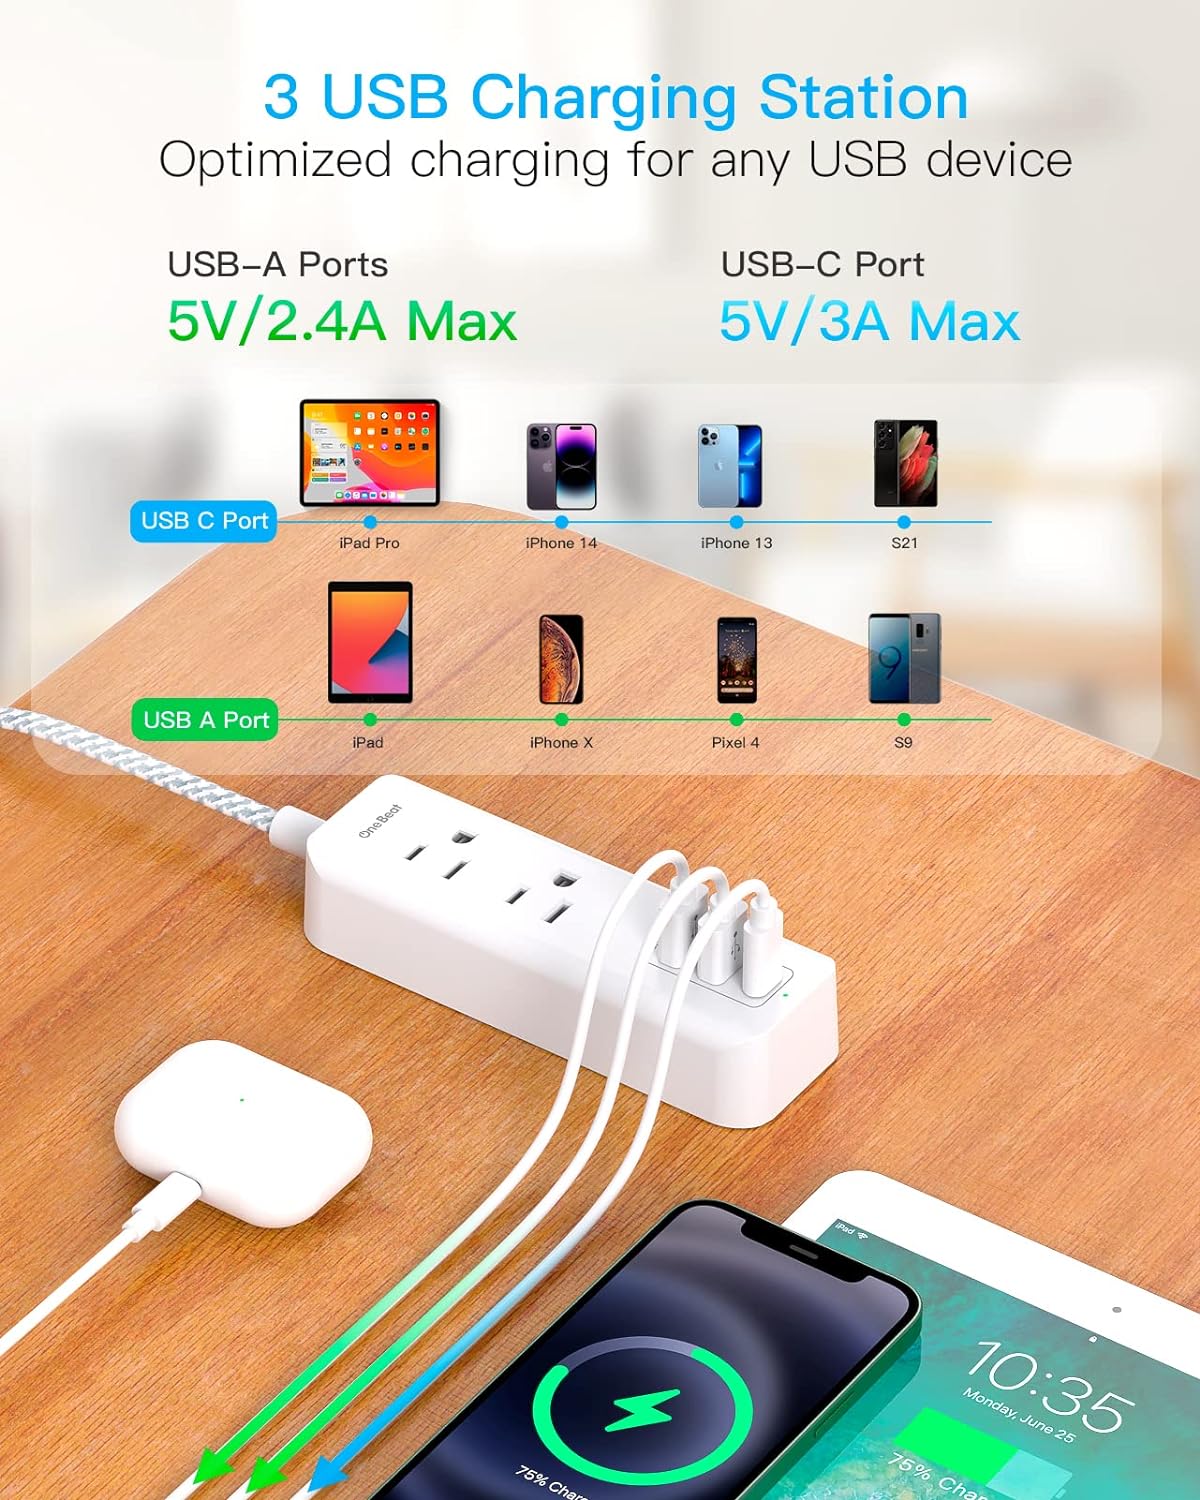 Cruise Essentials, Usb C Travel Power Strip, Flat Plug Power Strip With 2 Outlets 3 Usb Ports (1 Usb C), 5Ft Extension Cord Charging Station, Non Surge Protector For Cruise Ship, Travel, Home